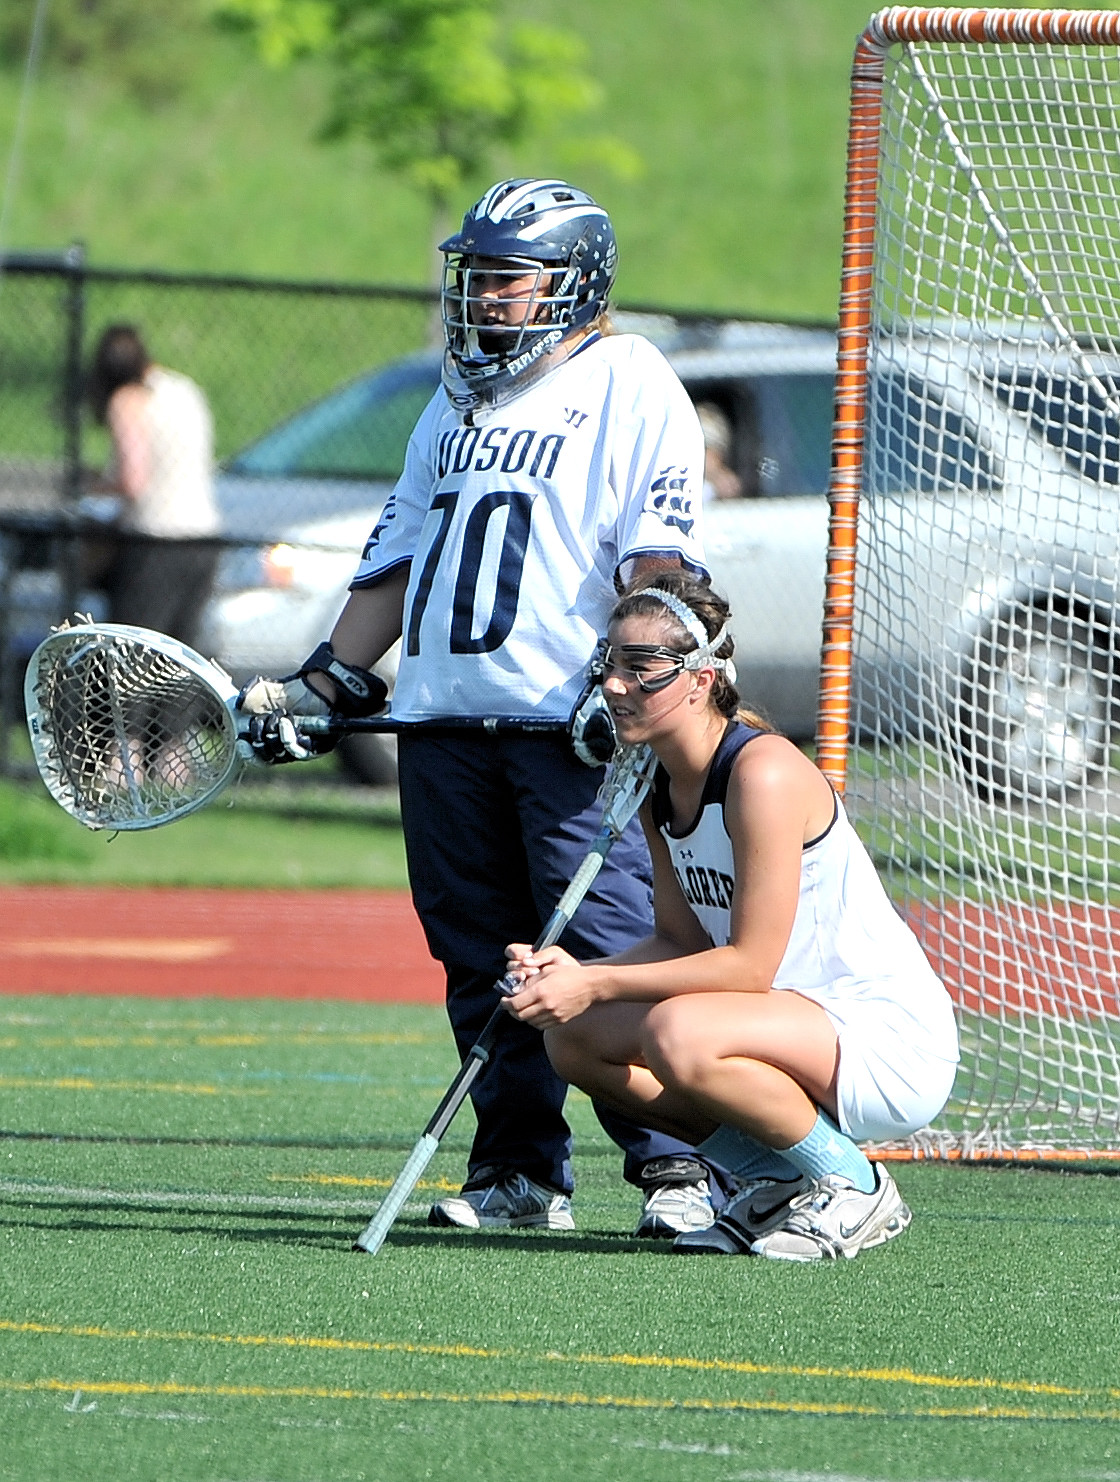 a lacrosse player holding the ball and a referee in the background